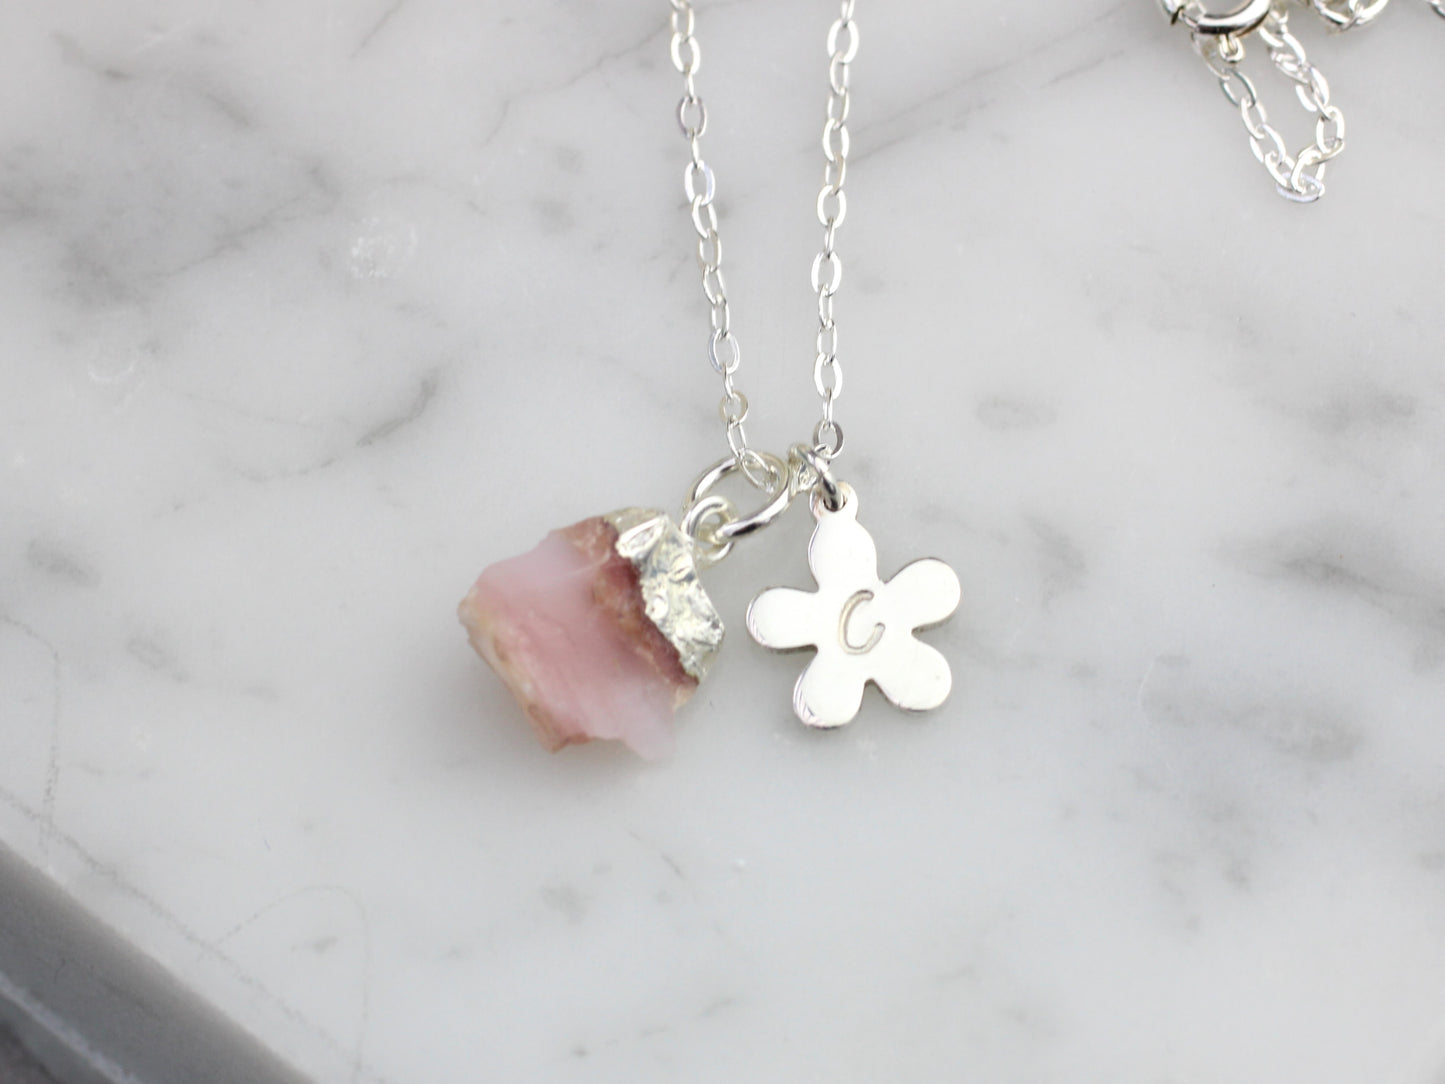 Personalised pink opal necklace in silver.